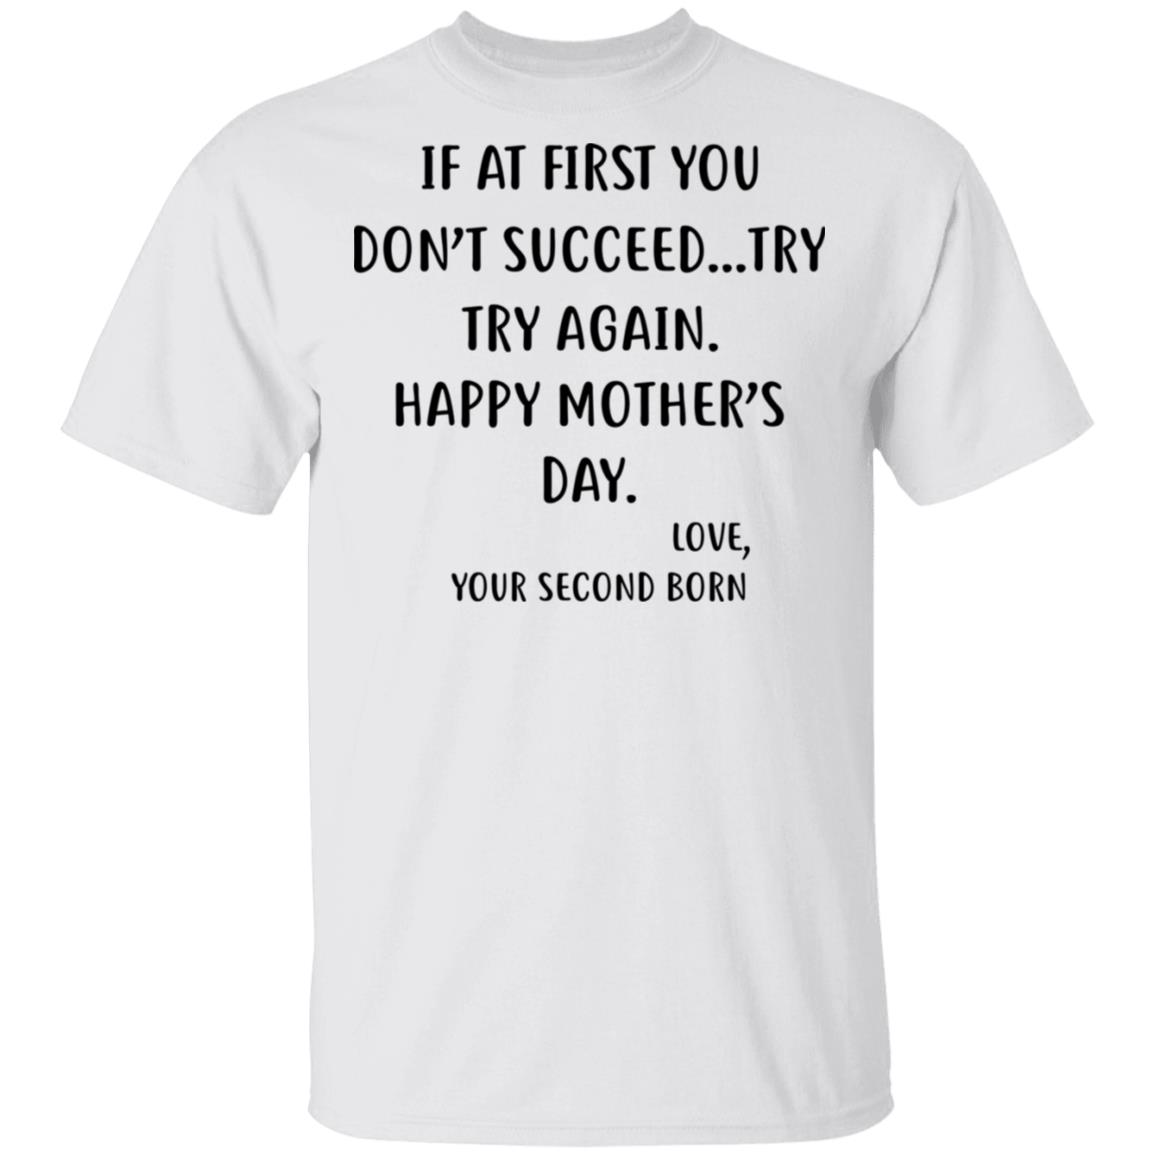 At First You Don’t Succeed Try, Try Again Happy Mother’s Day Love  Your Second Born Funny Shirts